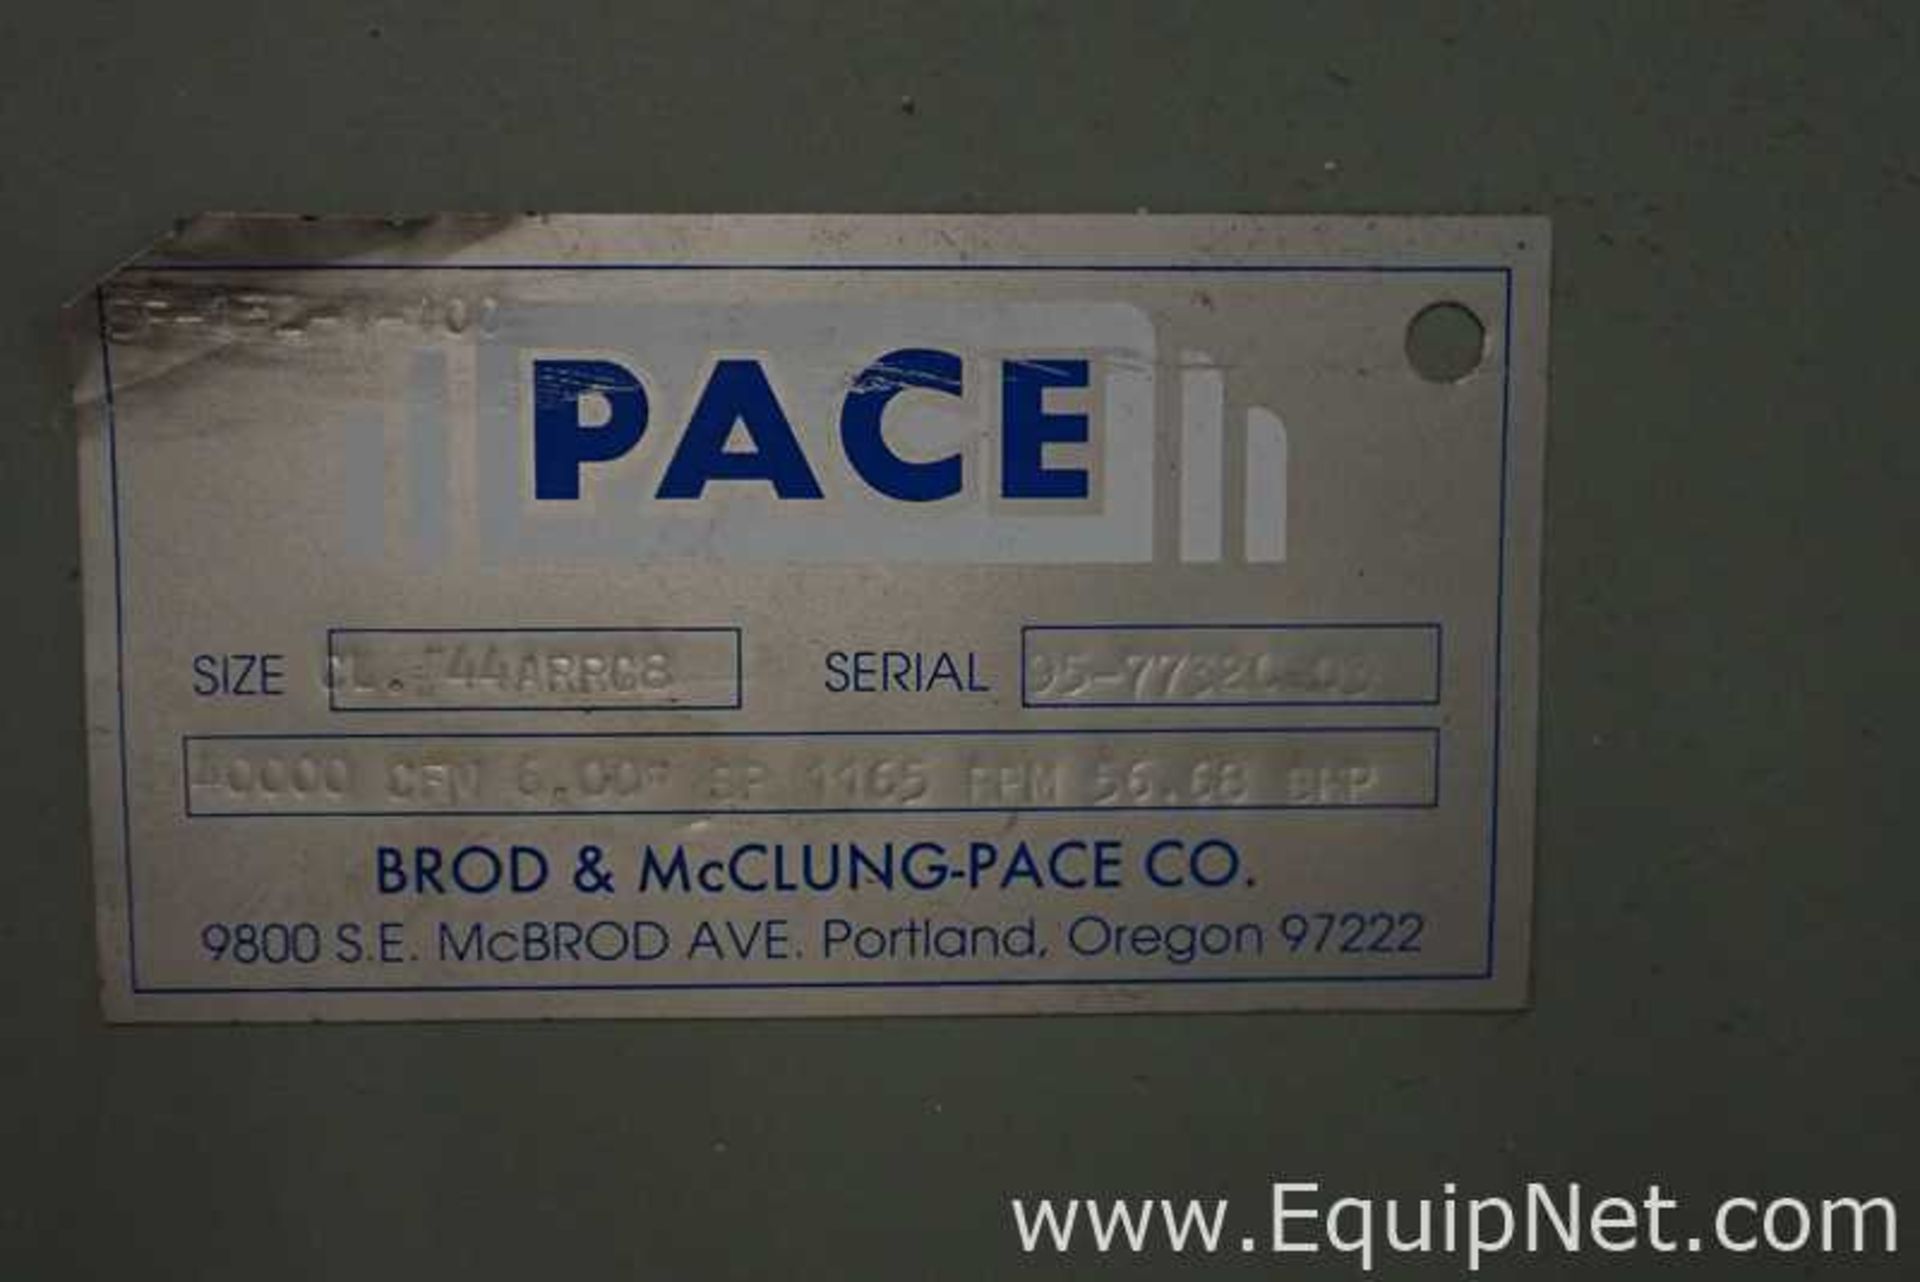 Pace Company CL 44ARRG8 General Air Handler Fan and Motor - Image 53 of 54